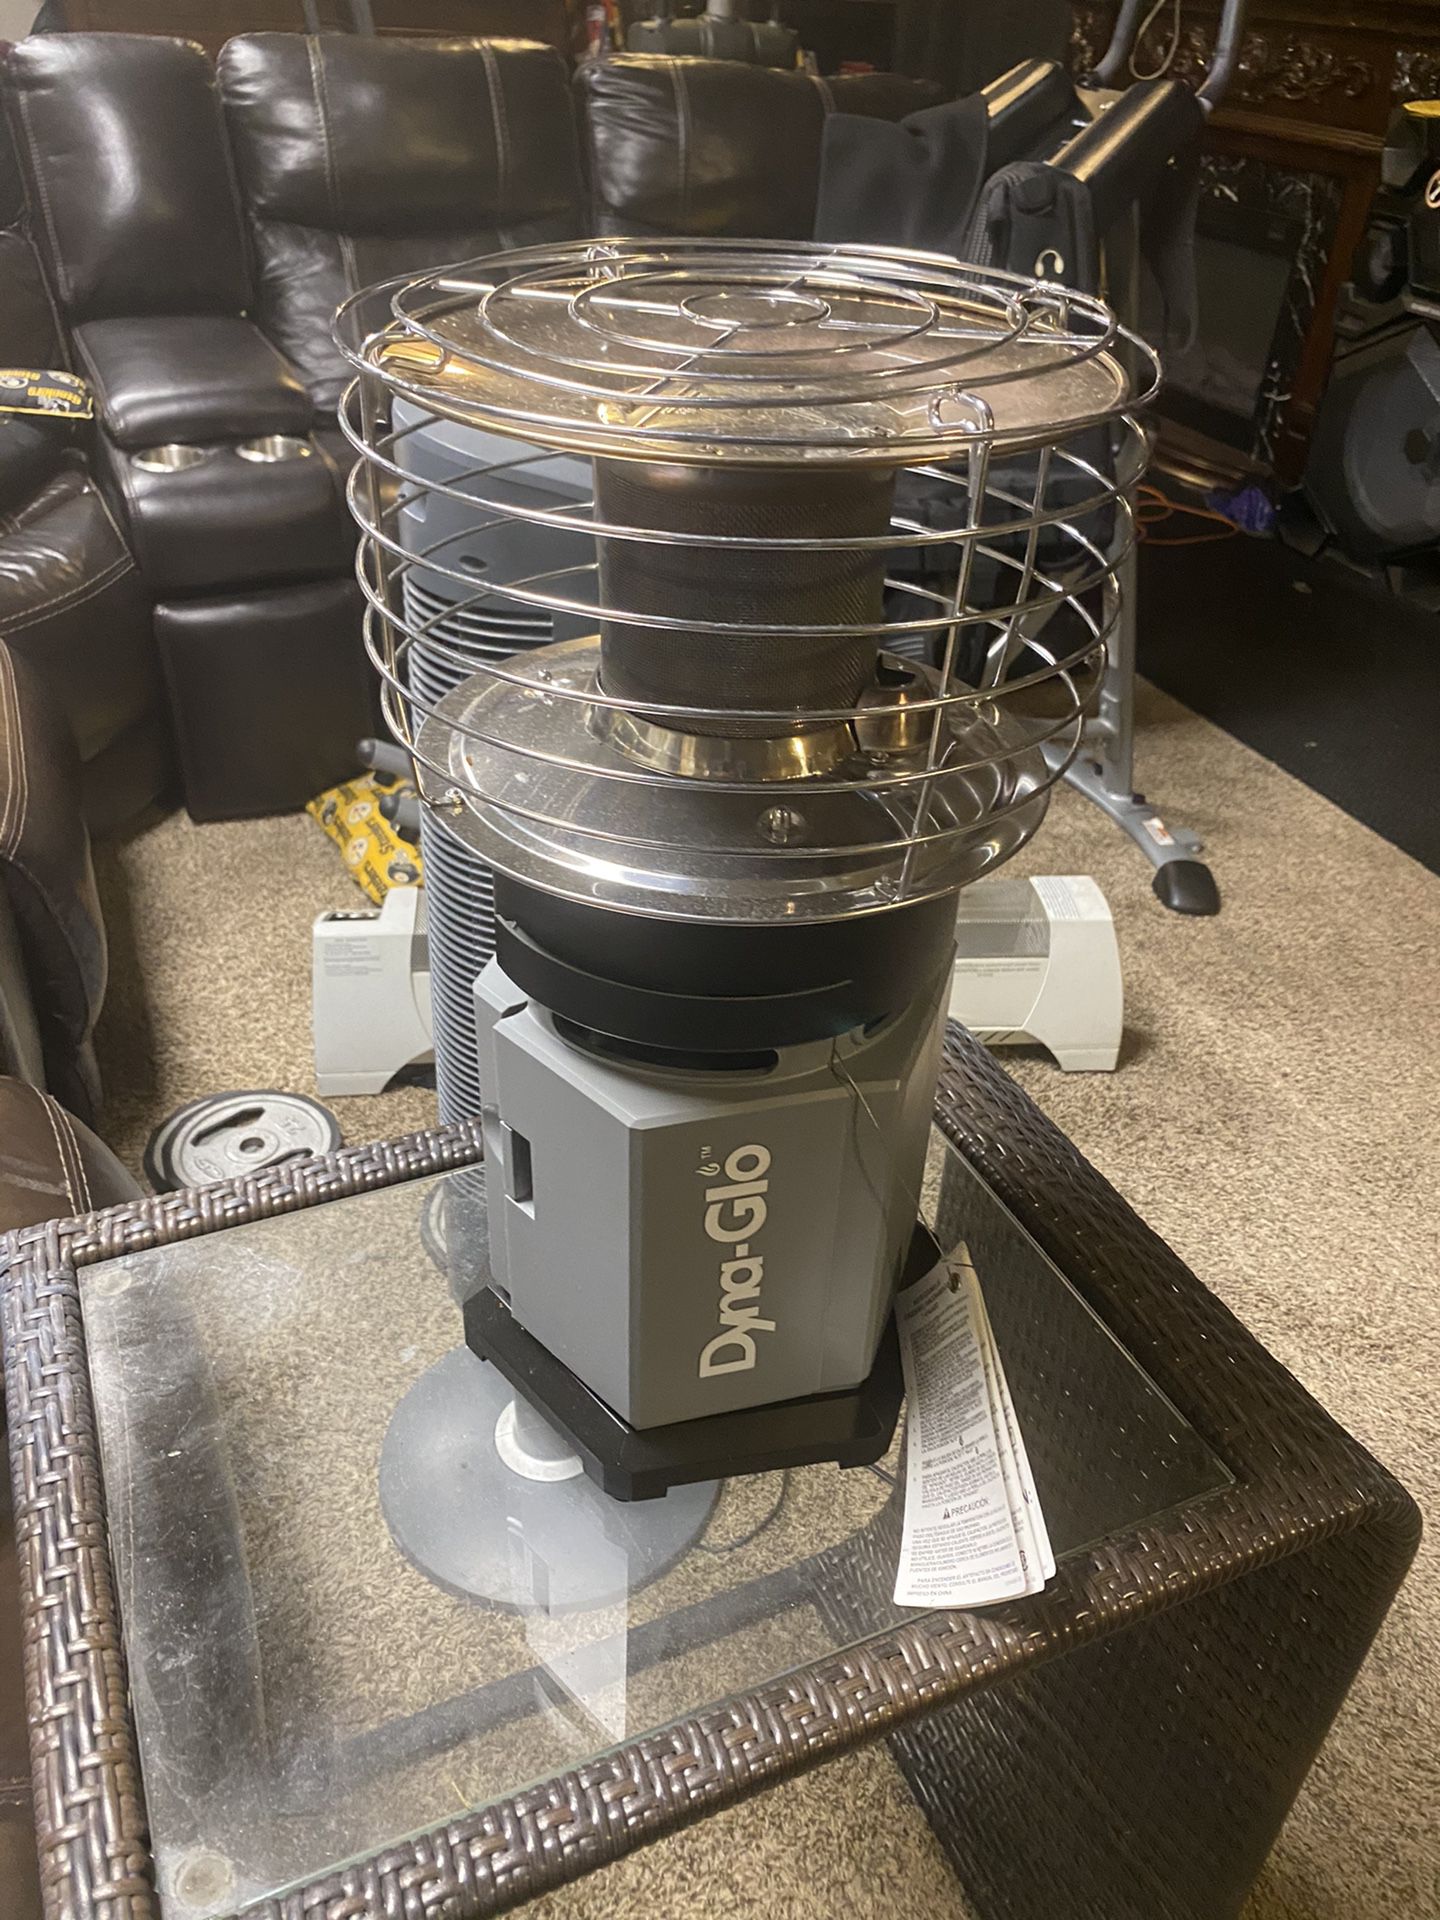 Diamond glow 360 propane portable heater Home Depot And Walmart is selling the exact same item for $100-$140 I’m asking 65 that is really great savigs